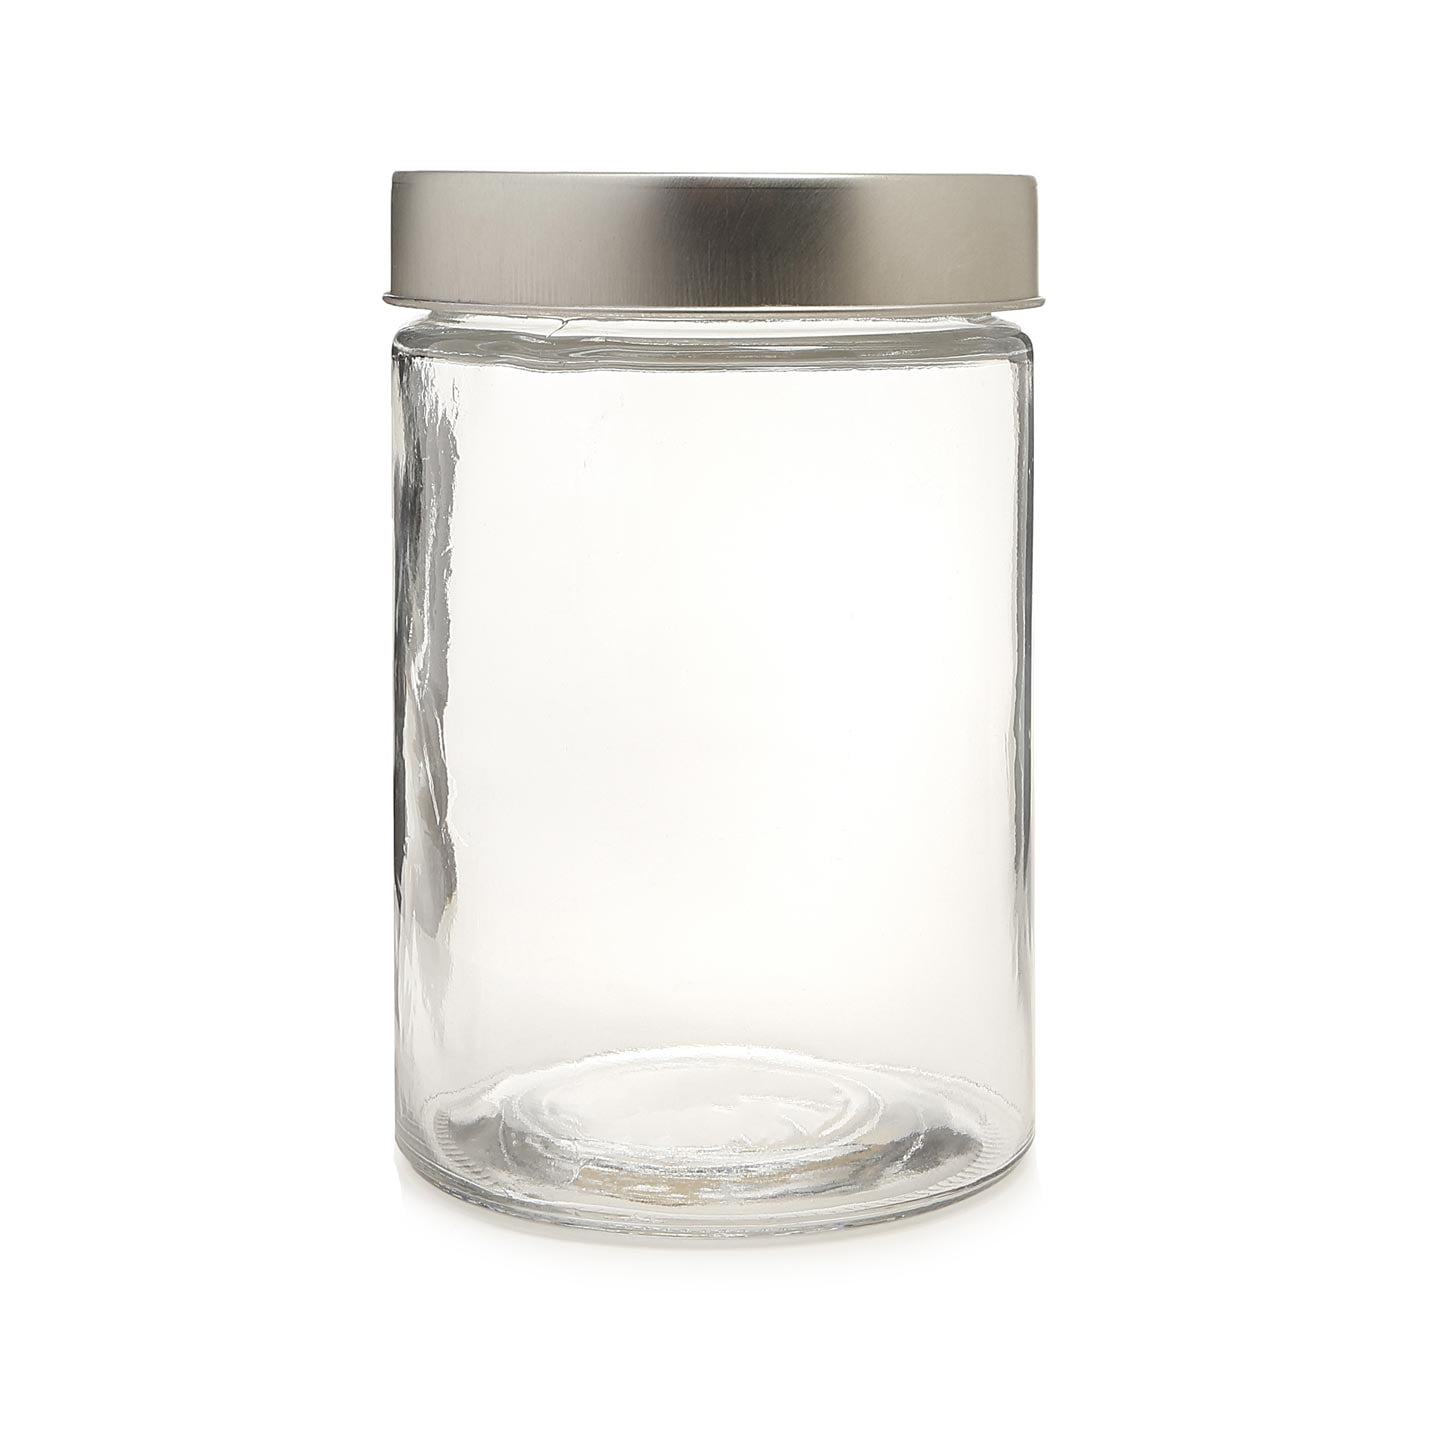 Small Glass Storage Container with Lid: Modern Design, 6 